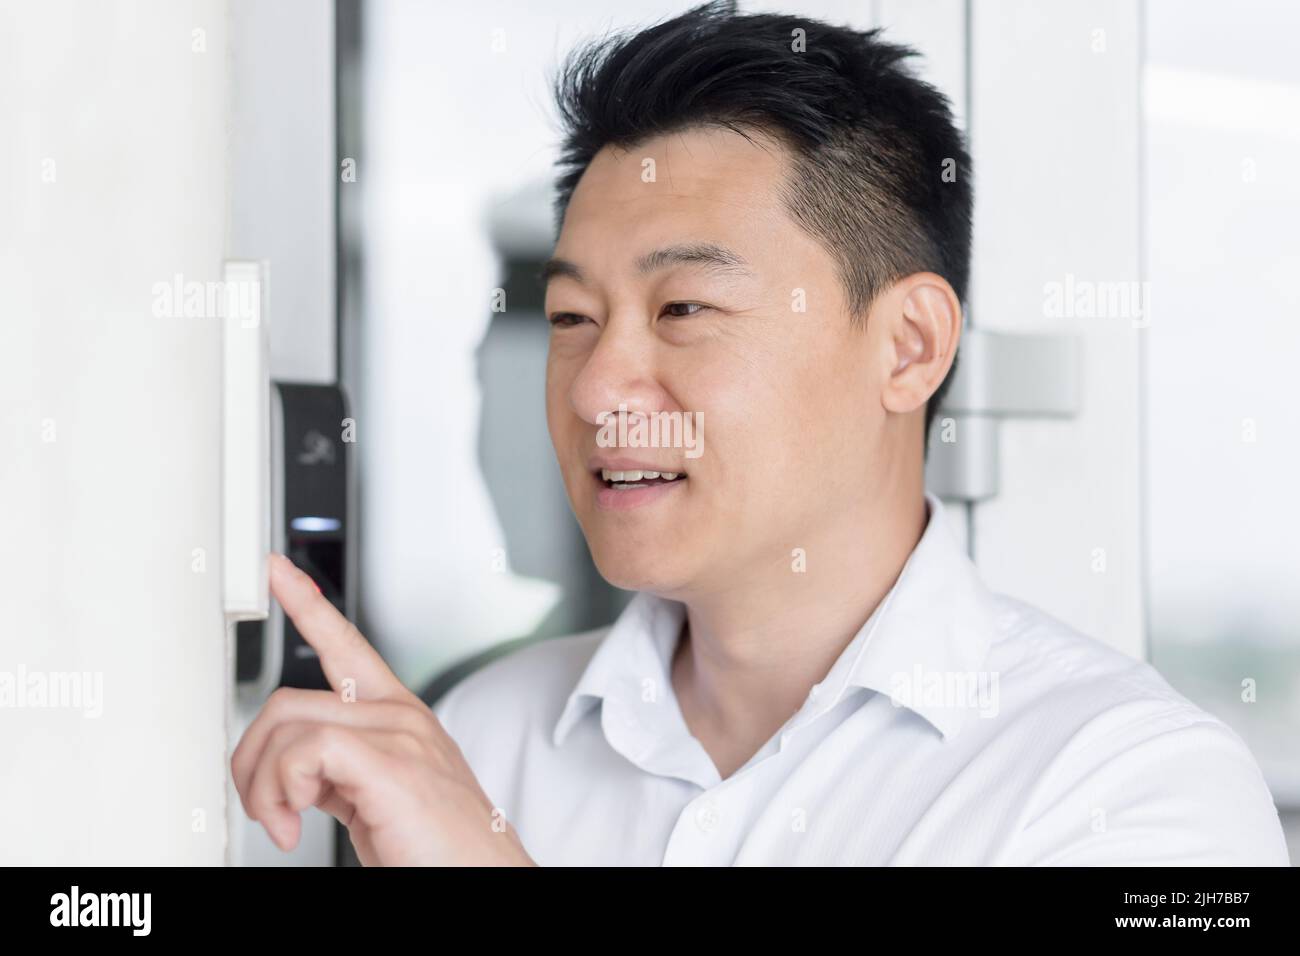 Close-up photo. Portrait of a young handsome Asian man, calling the intercom of the house, pressing the button, waiting for the door to open. Stock Photo